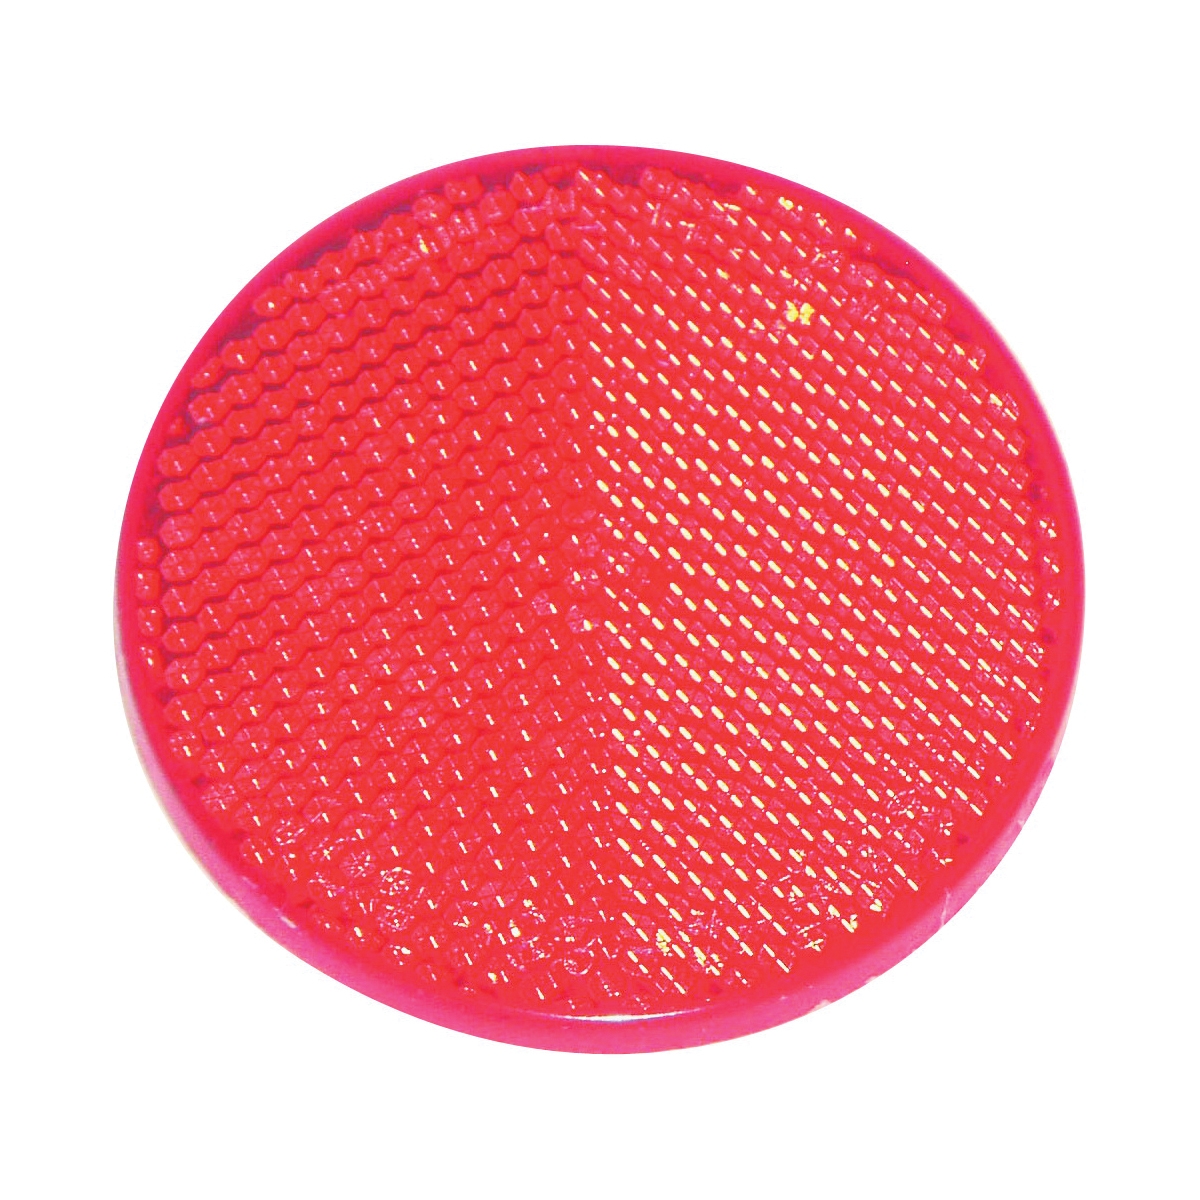 RV-657C Safety Reflector, Red Reflector, Plastic Reflector, Adhesive Mounting